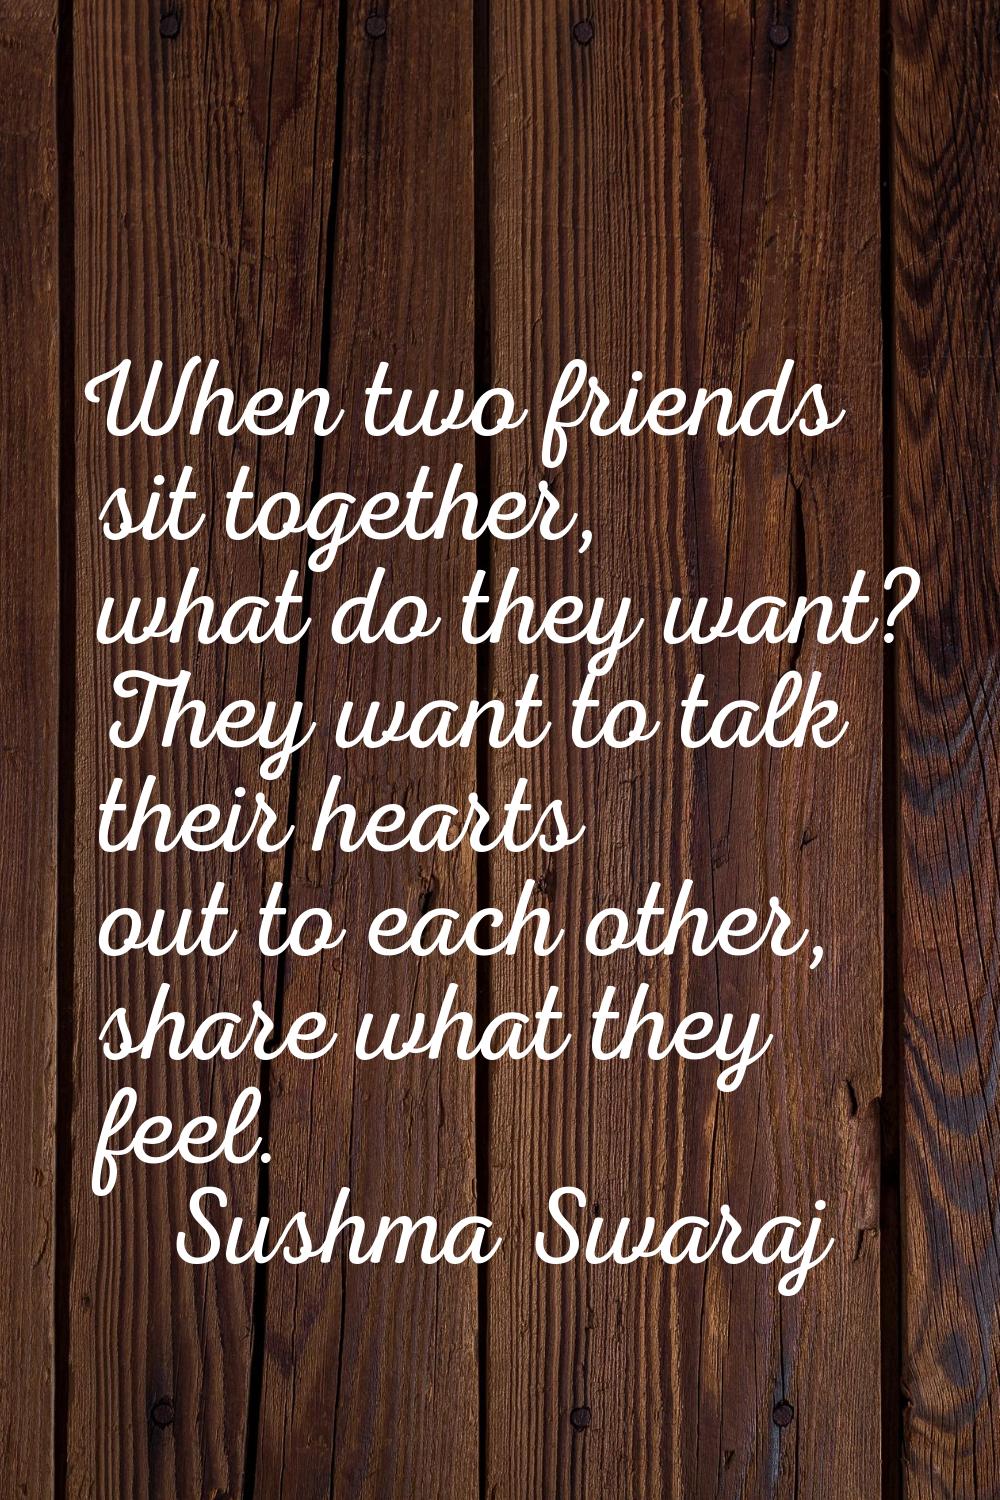 When two friends sit together, what do they want? They want to talk their hearts out to each other,